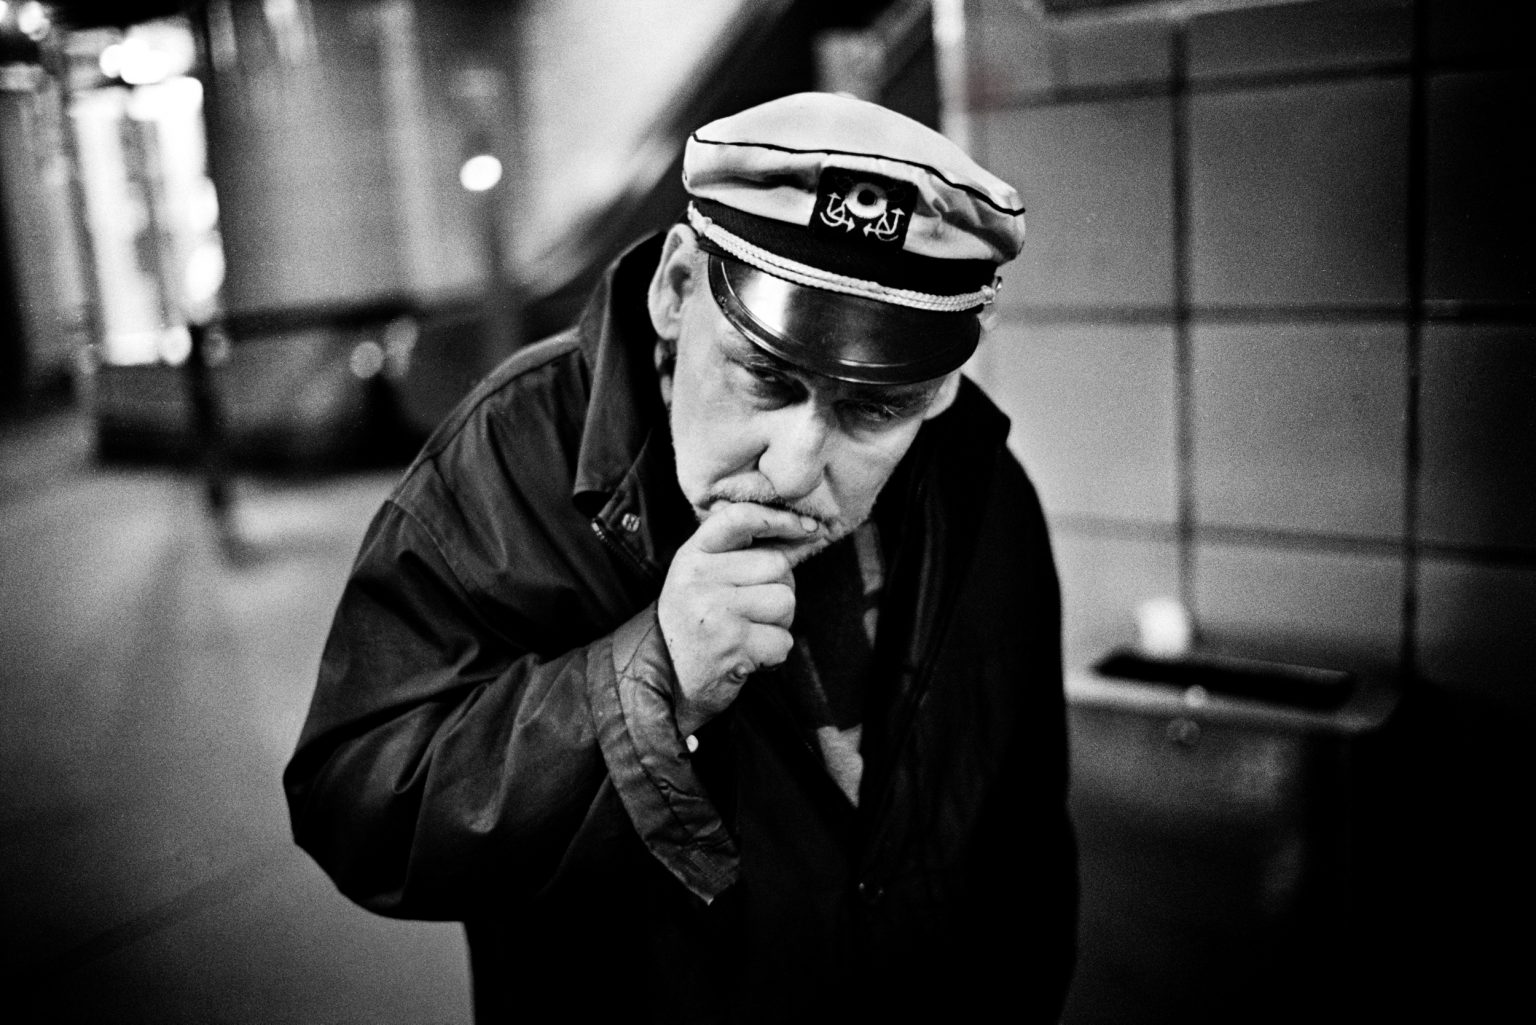 Berlin , 2011- Berlin Diary is a research that documents the margins of society; an investigation into different worlds including relationships; the loneliness of the human being; alcoholism and abuse; lovers and their conflicts and finally the relationship between people and city. A portrait of Man in the station of Hermanplatz.
><
Berlino ,2011- Berlin Diary è una ricerca che documenta i margini della società; un'indagine in mondi diversi tra cui si esplorano relazioni; la solitudine dellessere umano; Lalcolismo e gli abusi; gli amanti e i loro conflitti e infine; il rapporto tra persone e città.Un uomo ritratto nella stazione di Hermanplatz.